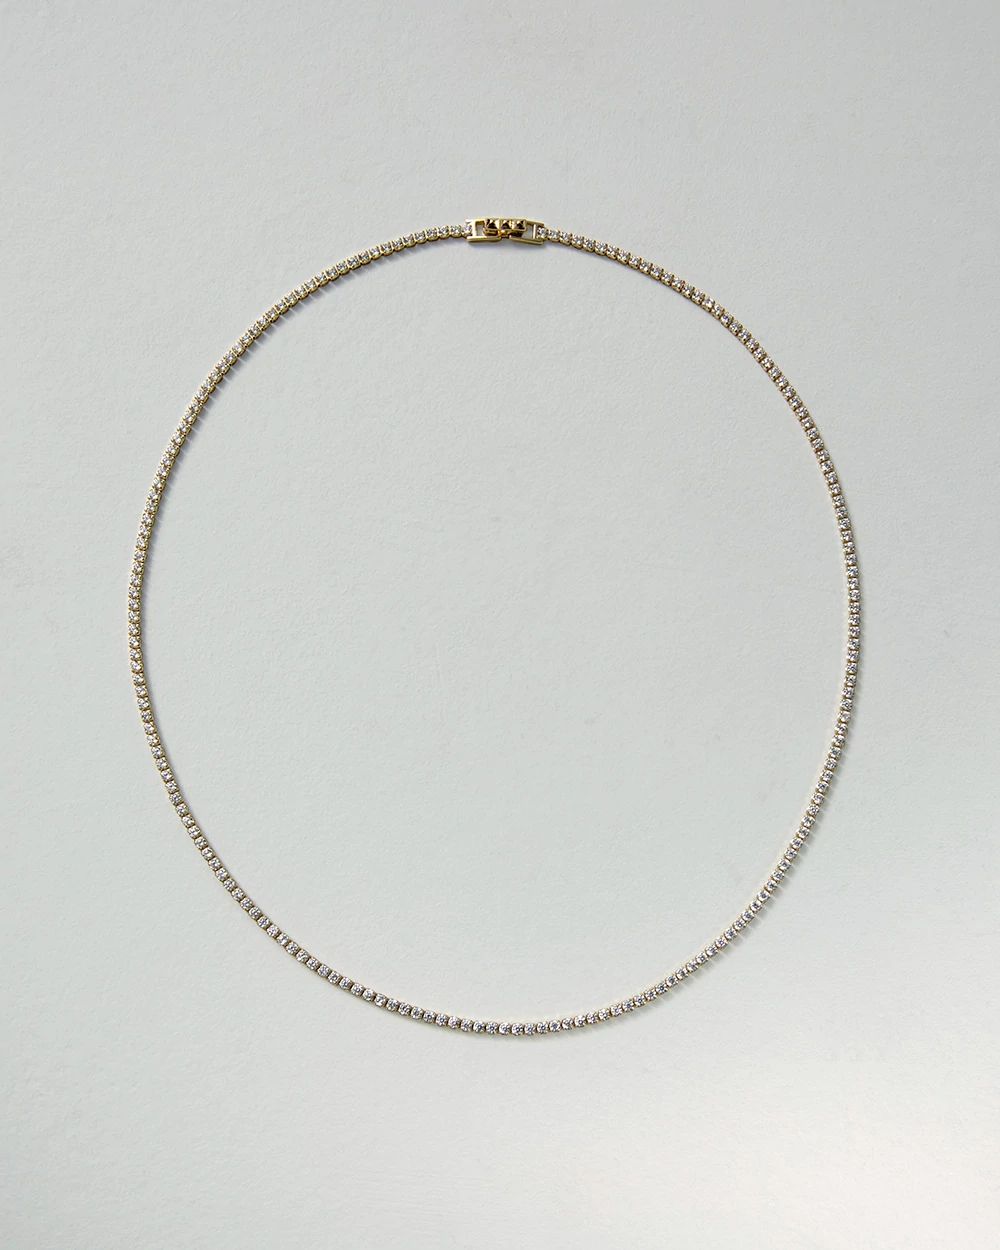 Gold Crystal Tennis Necklace click to view larger image.